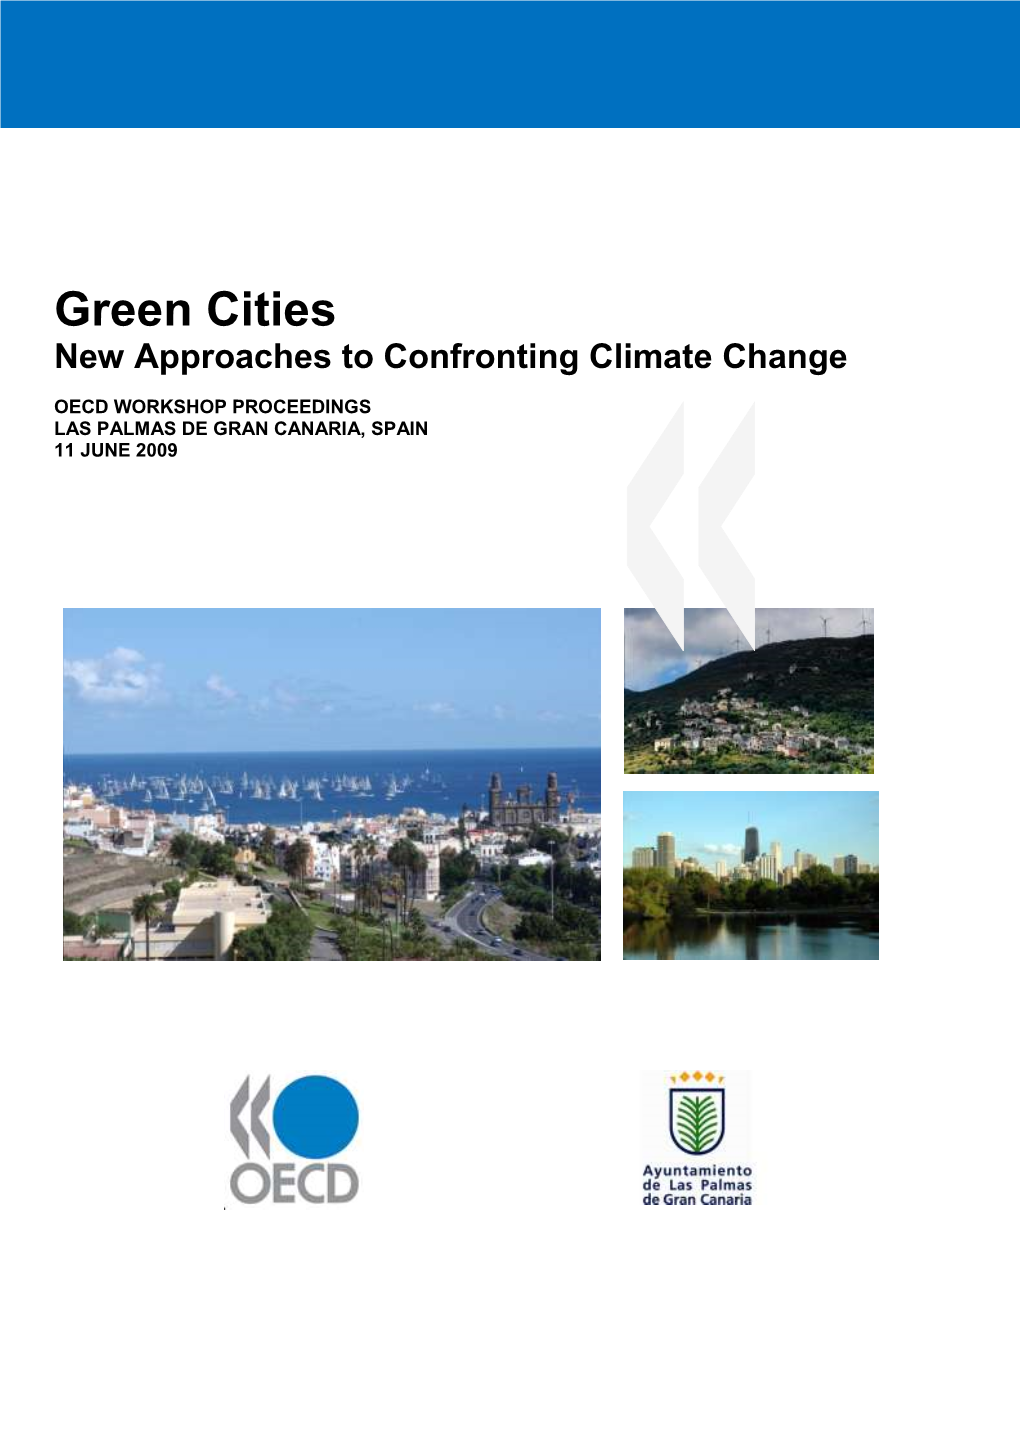 Green Cities New Approaches to Confronting Climate Change